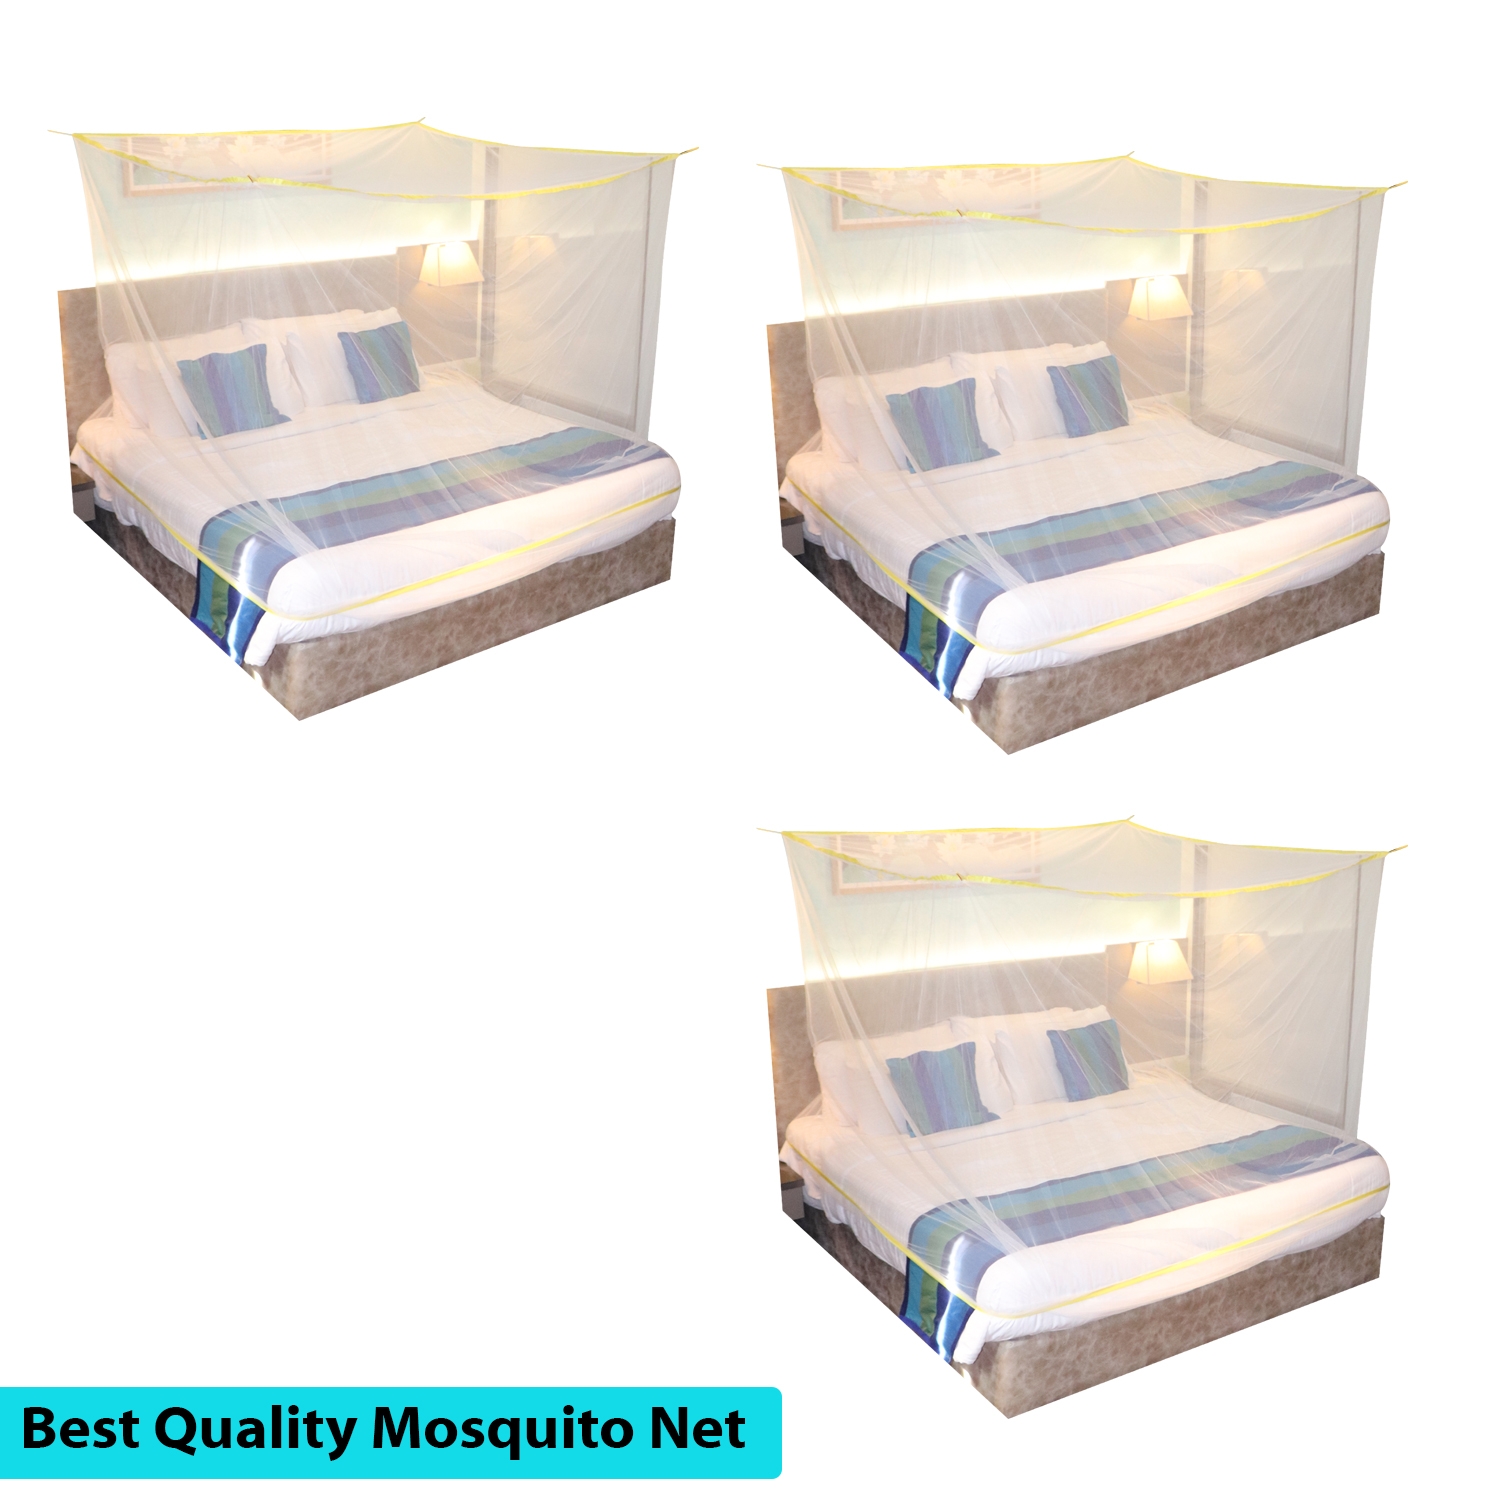 Paola Jewels | Mosquito Net for Double Bed, King-Size, Square Hanging Foldable Polyester Net White And YellowPack of 3